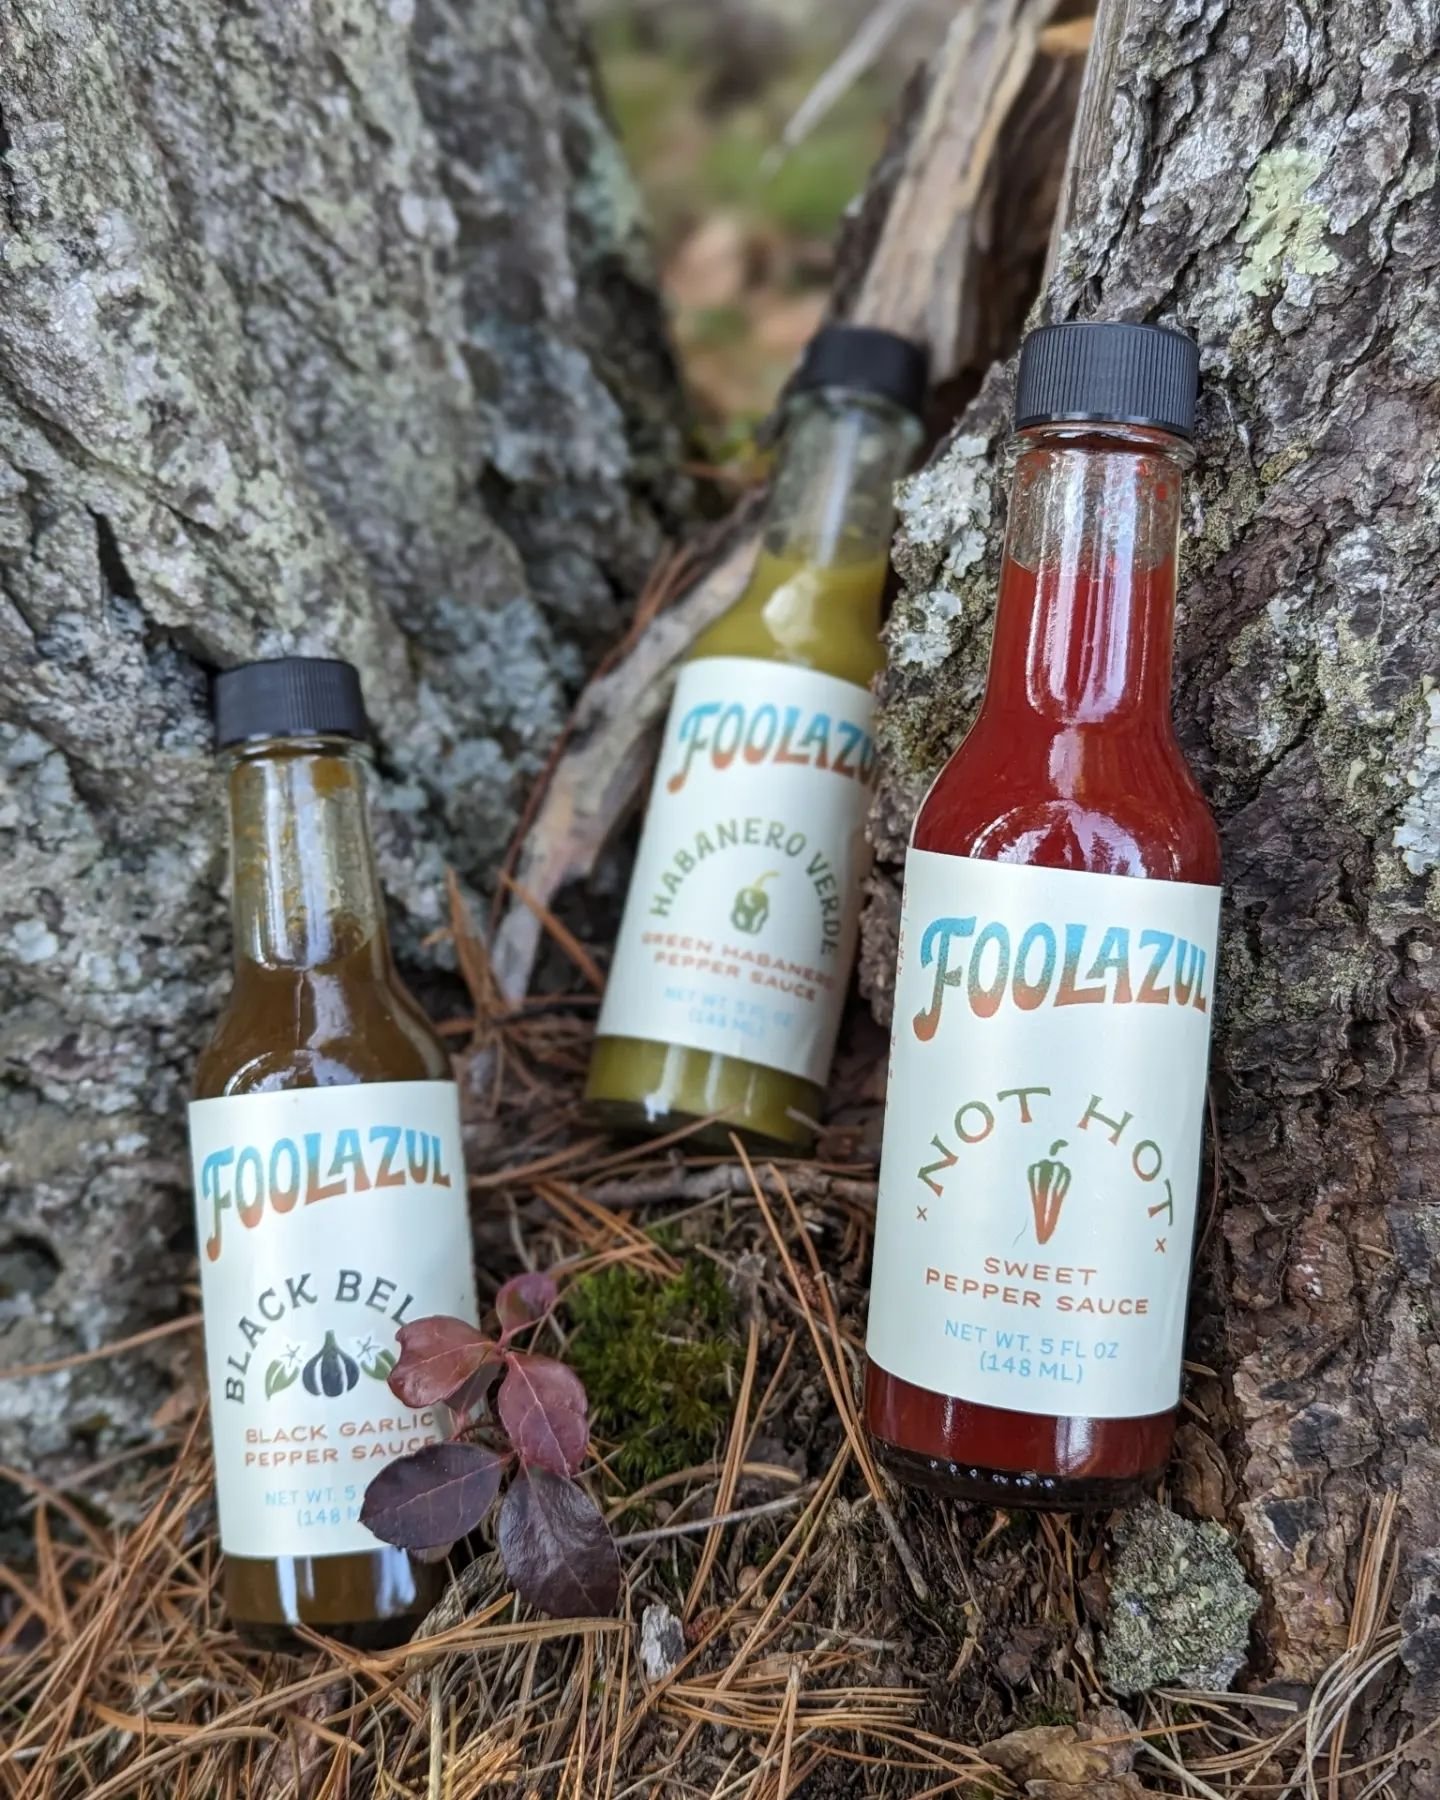 Hand-drawn packaging design for Foolazul! All of their peppers are grown by them on @dukesfarm.up 🌱 The hot sauces are super tasty, highly recommend.